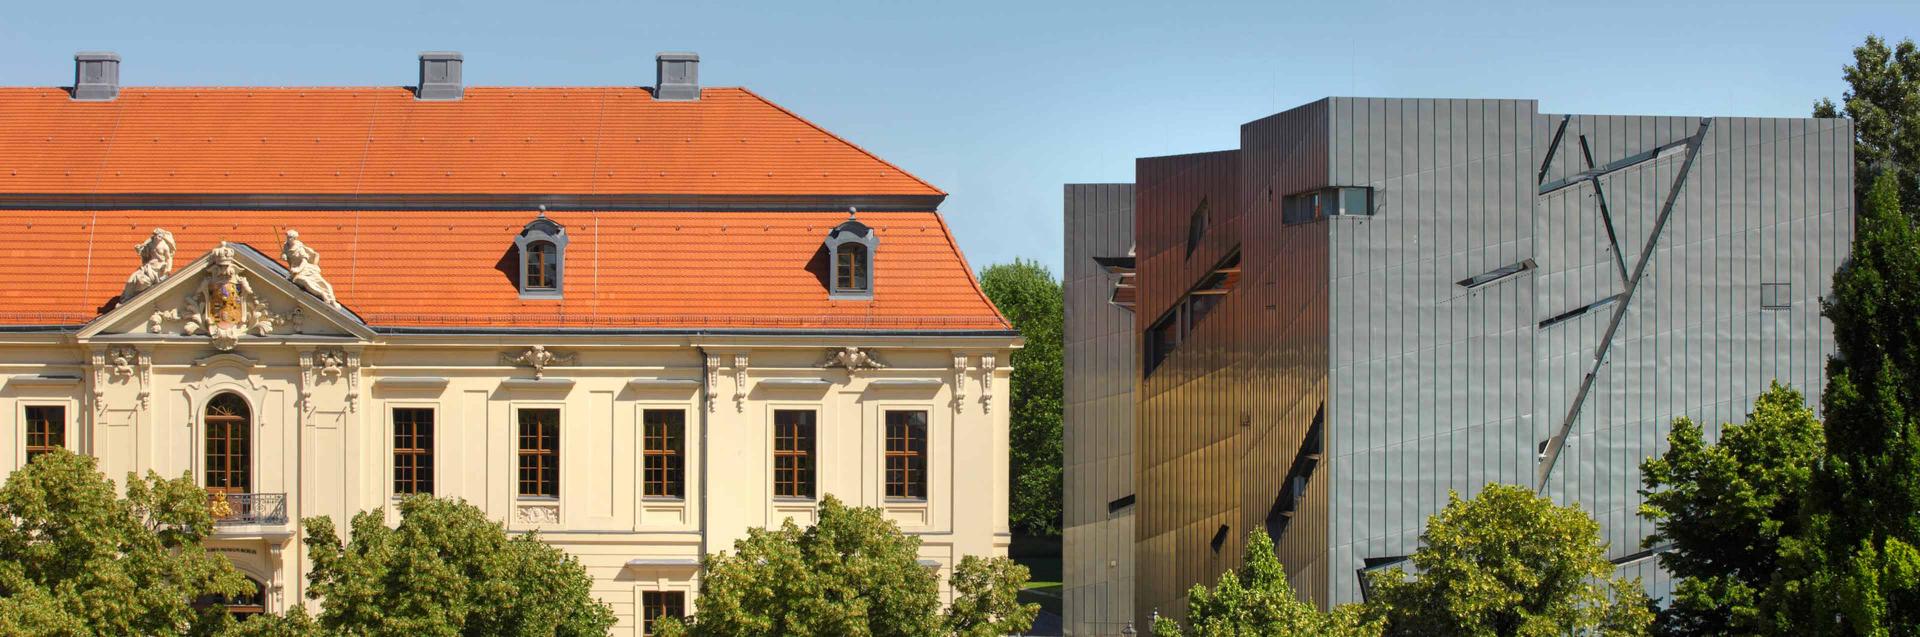 View of the Jewish Museum Berlin from the street: the facade of the baroque old building and next to it the Libeskind building made of titanium zinc.